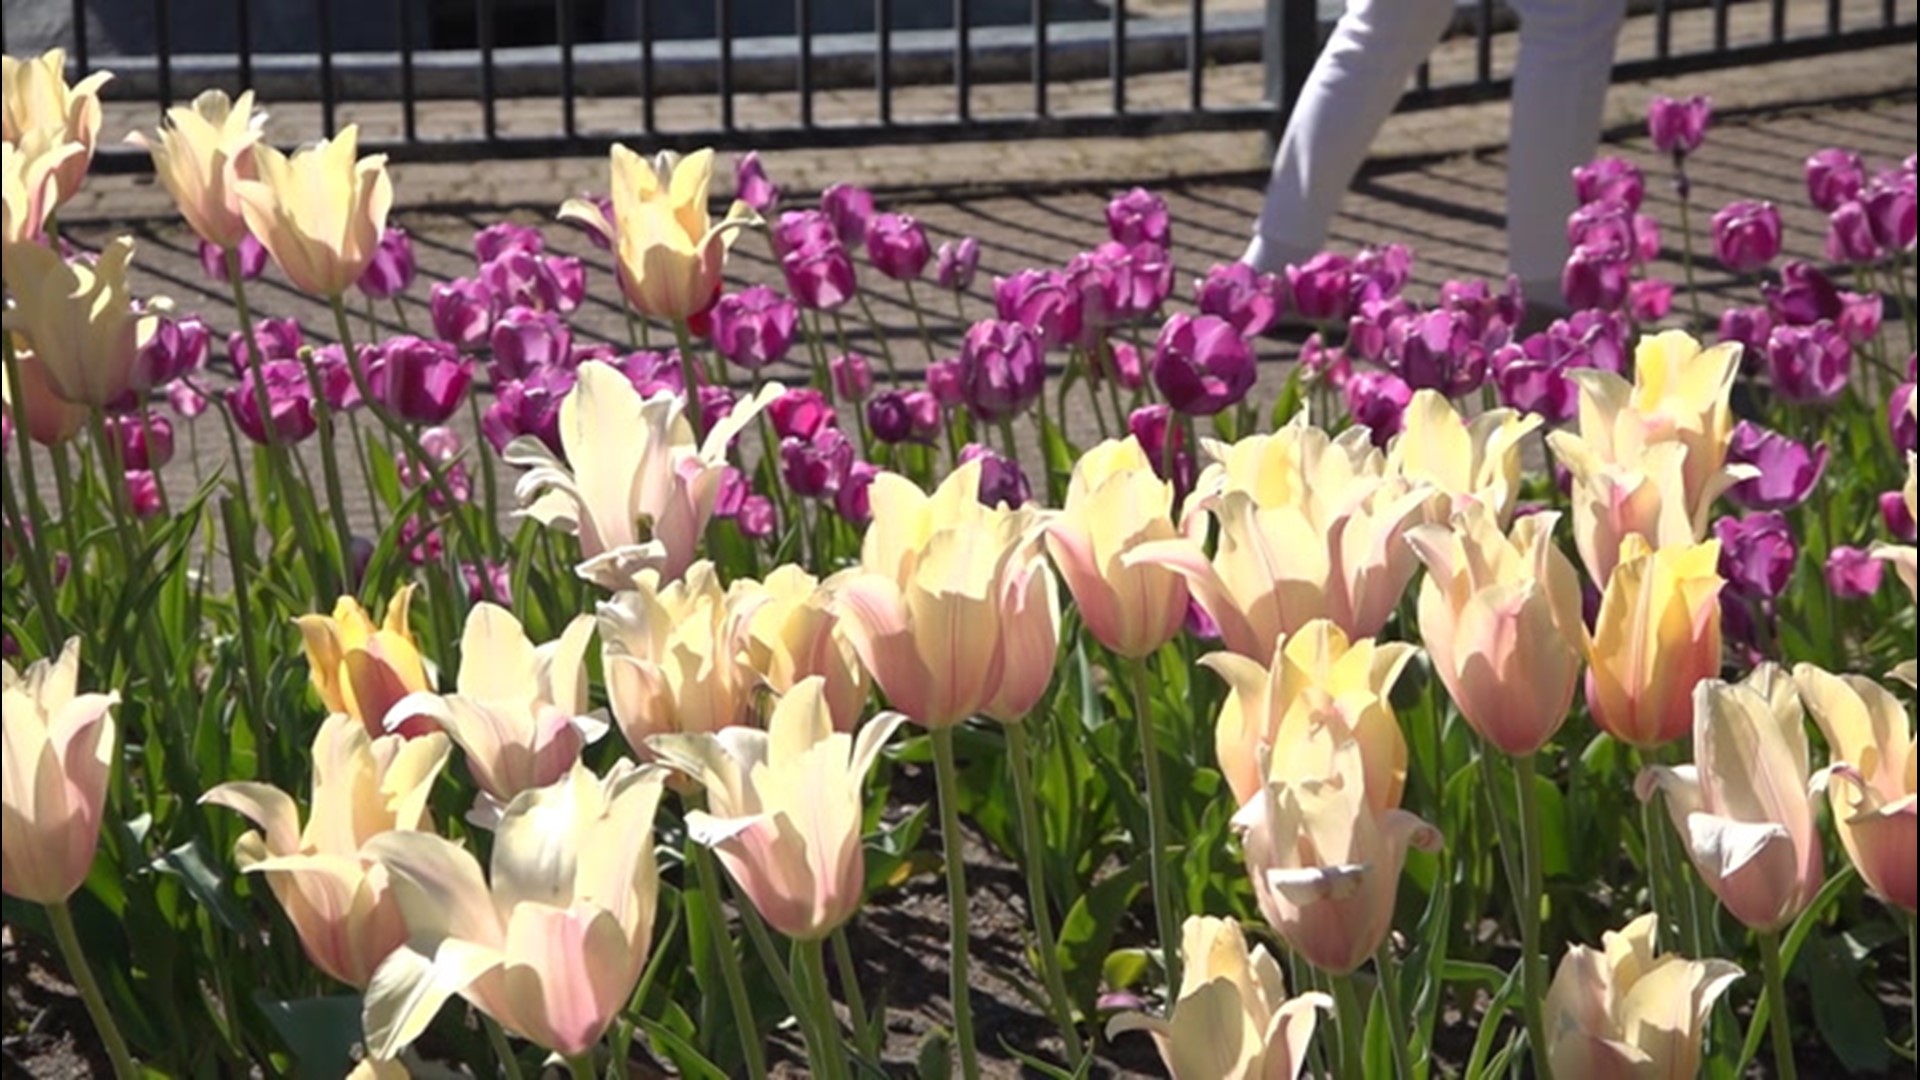 Colorful tulips are one of the best signs of spring. AccuWeather's Emmy Victor checked out one of the largest tulip festivals in the country.